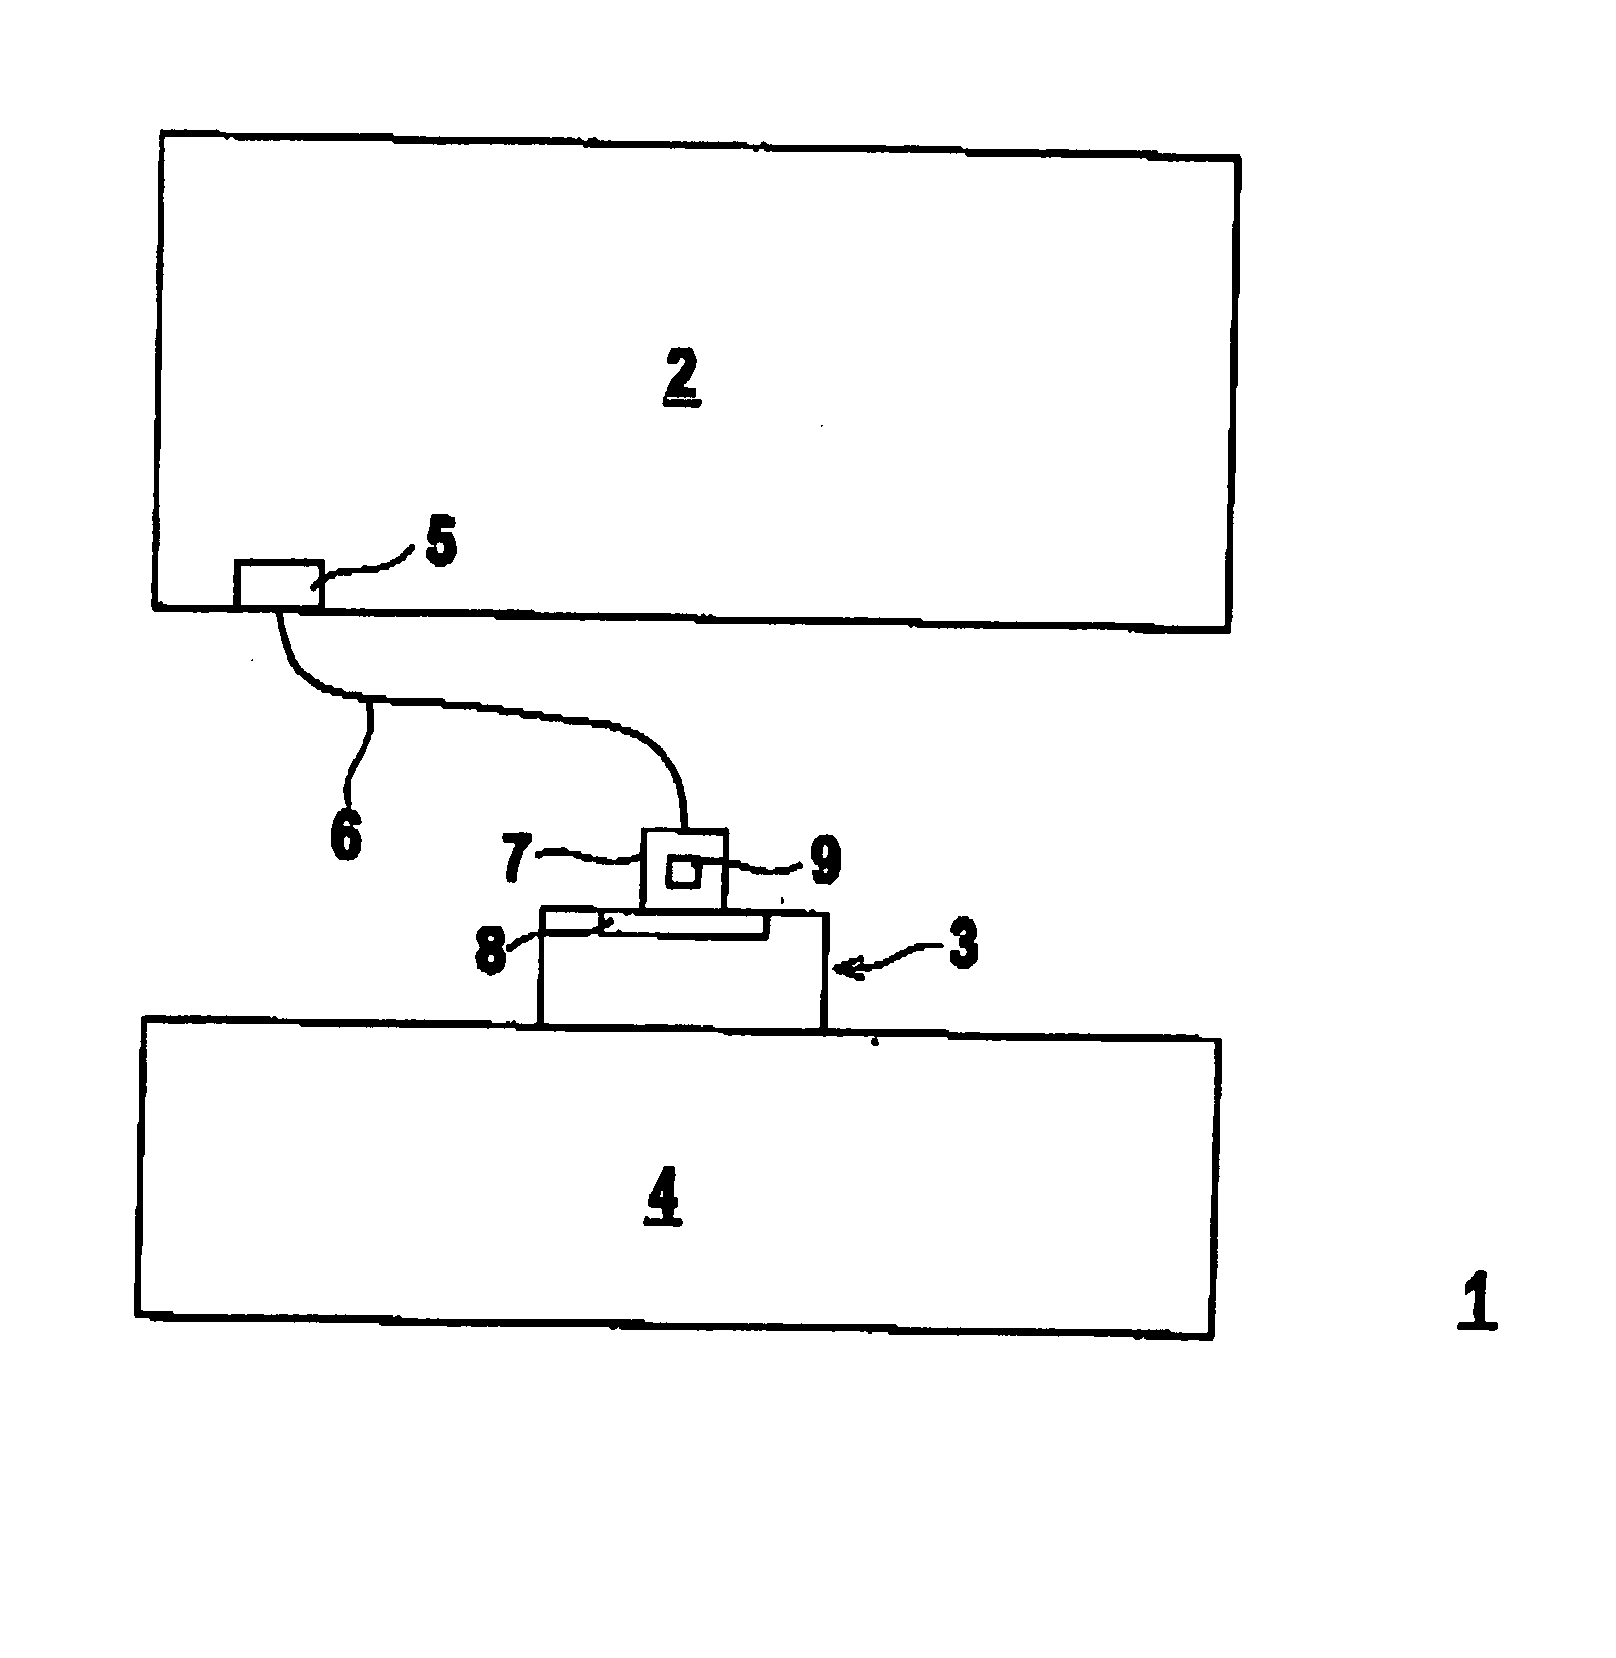 Device for detecting objects in a monitored area